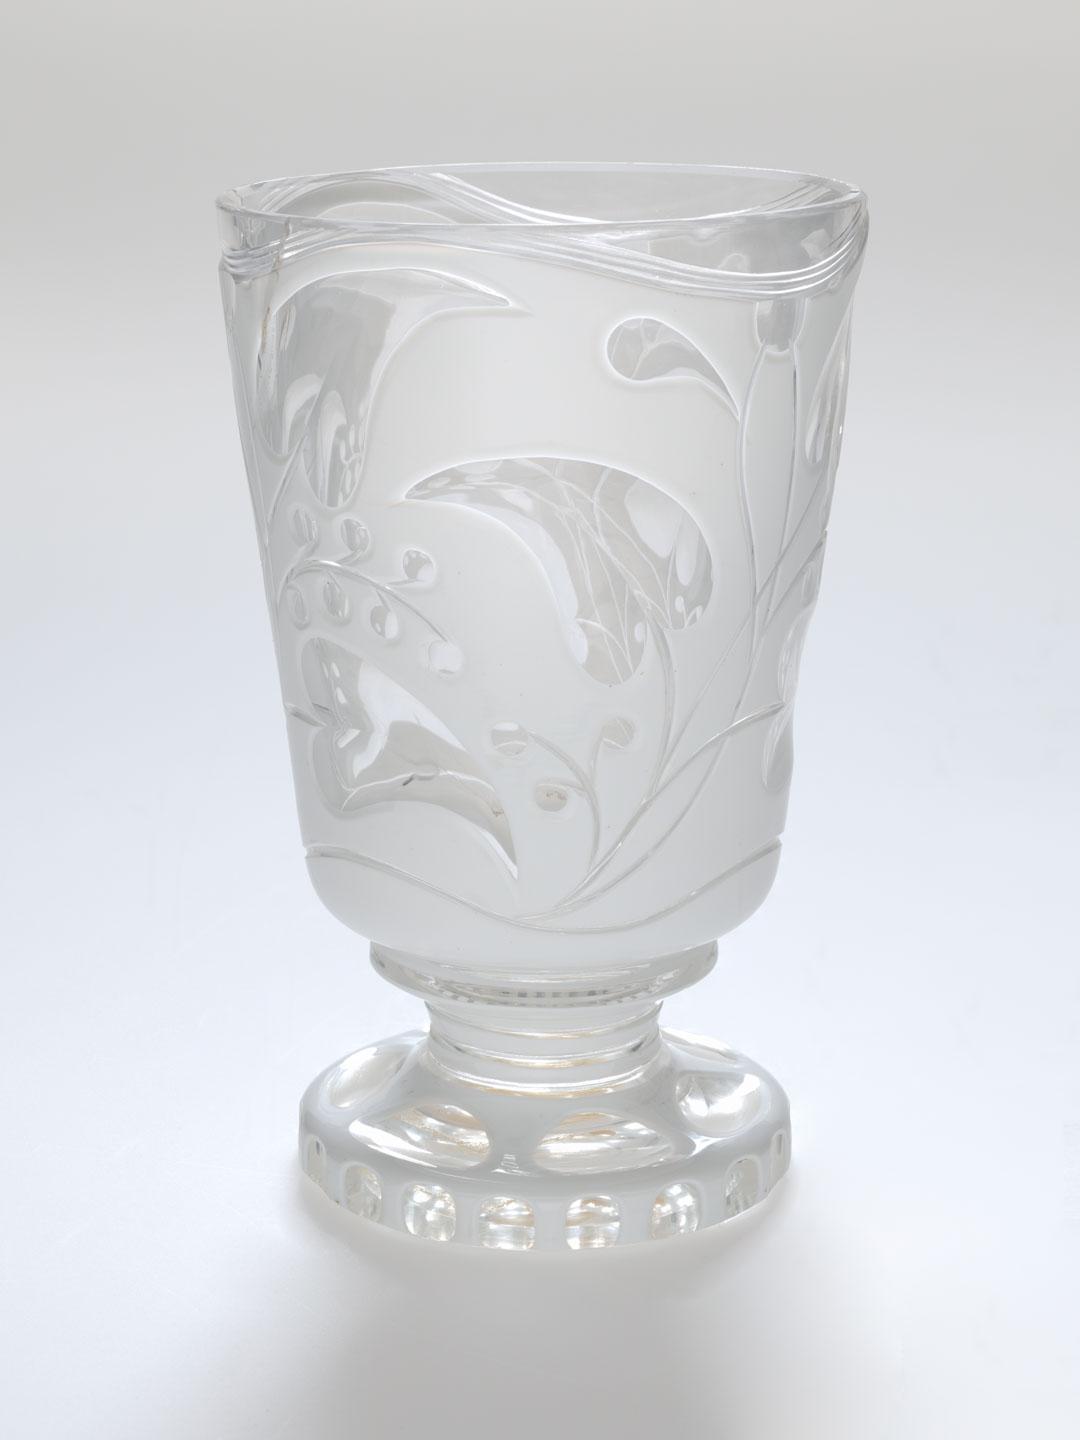 Artwork Footed beaker this artwork made of Clear glass cased white and wheel cut with a trailing vine motif, created in 1840-01-01